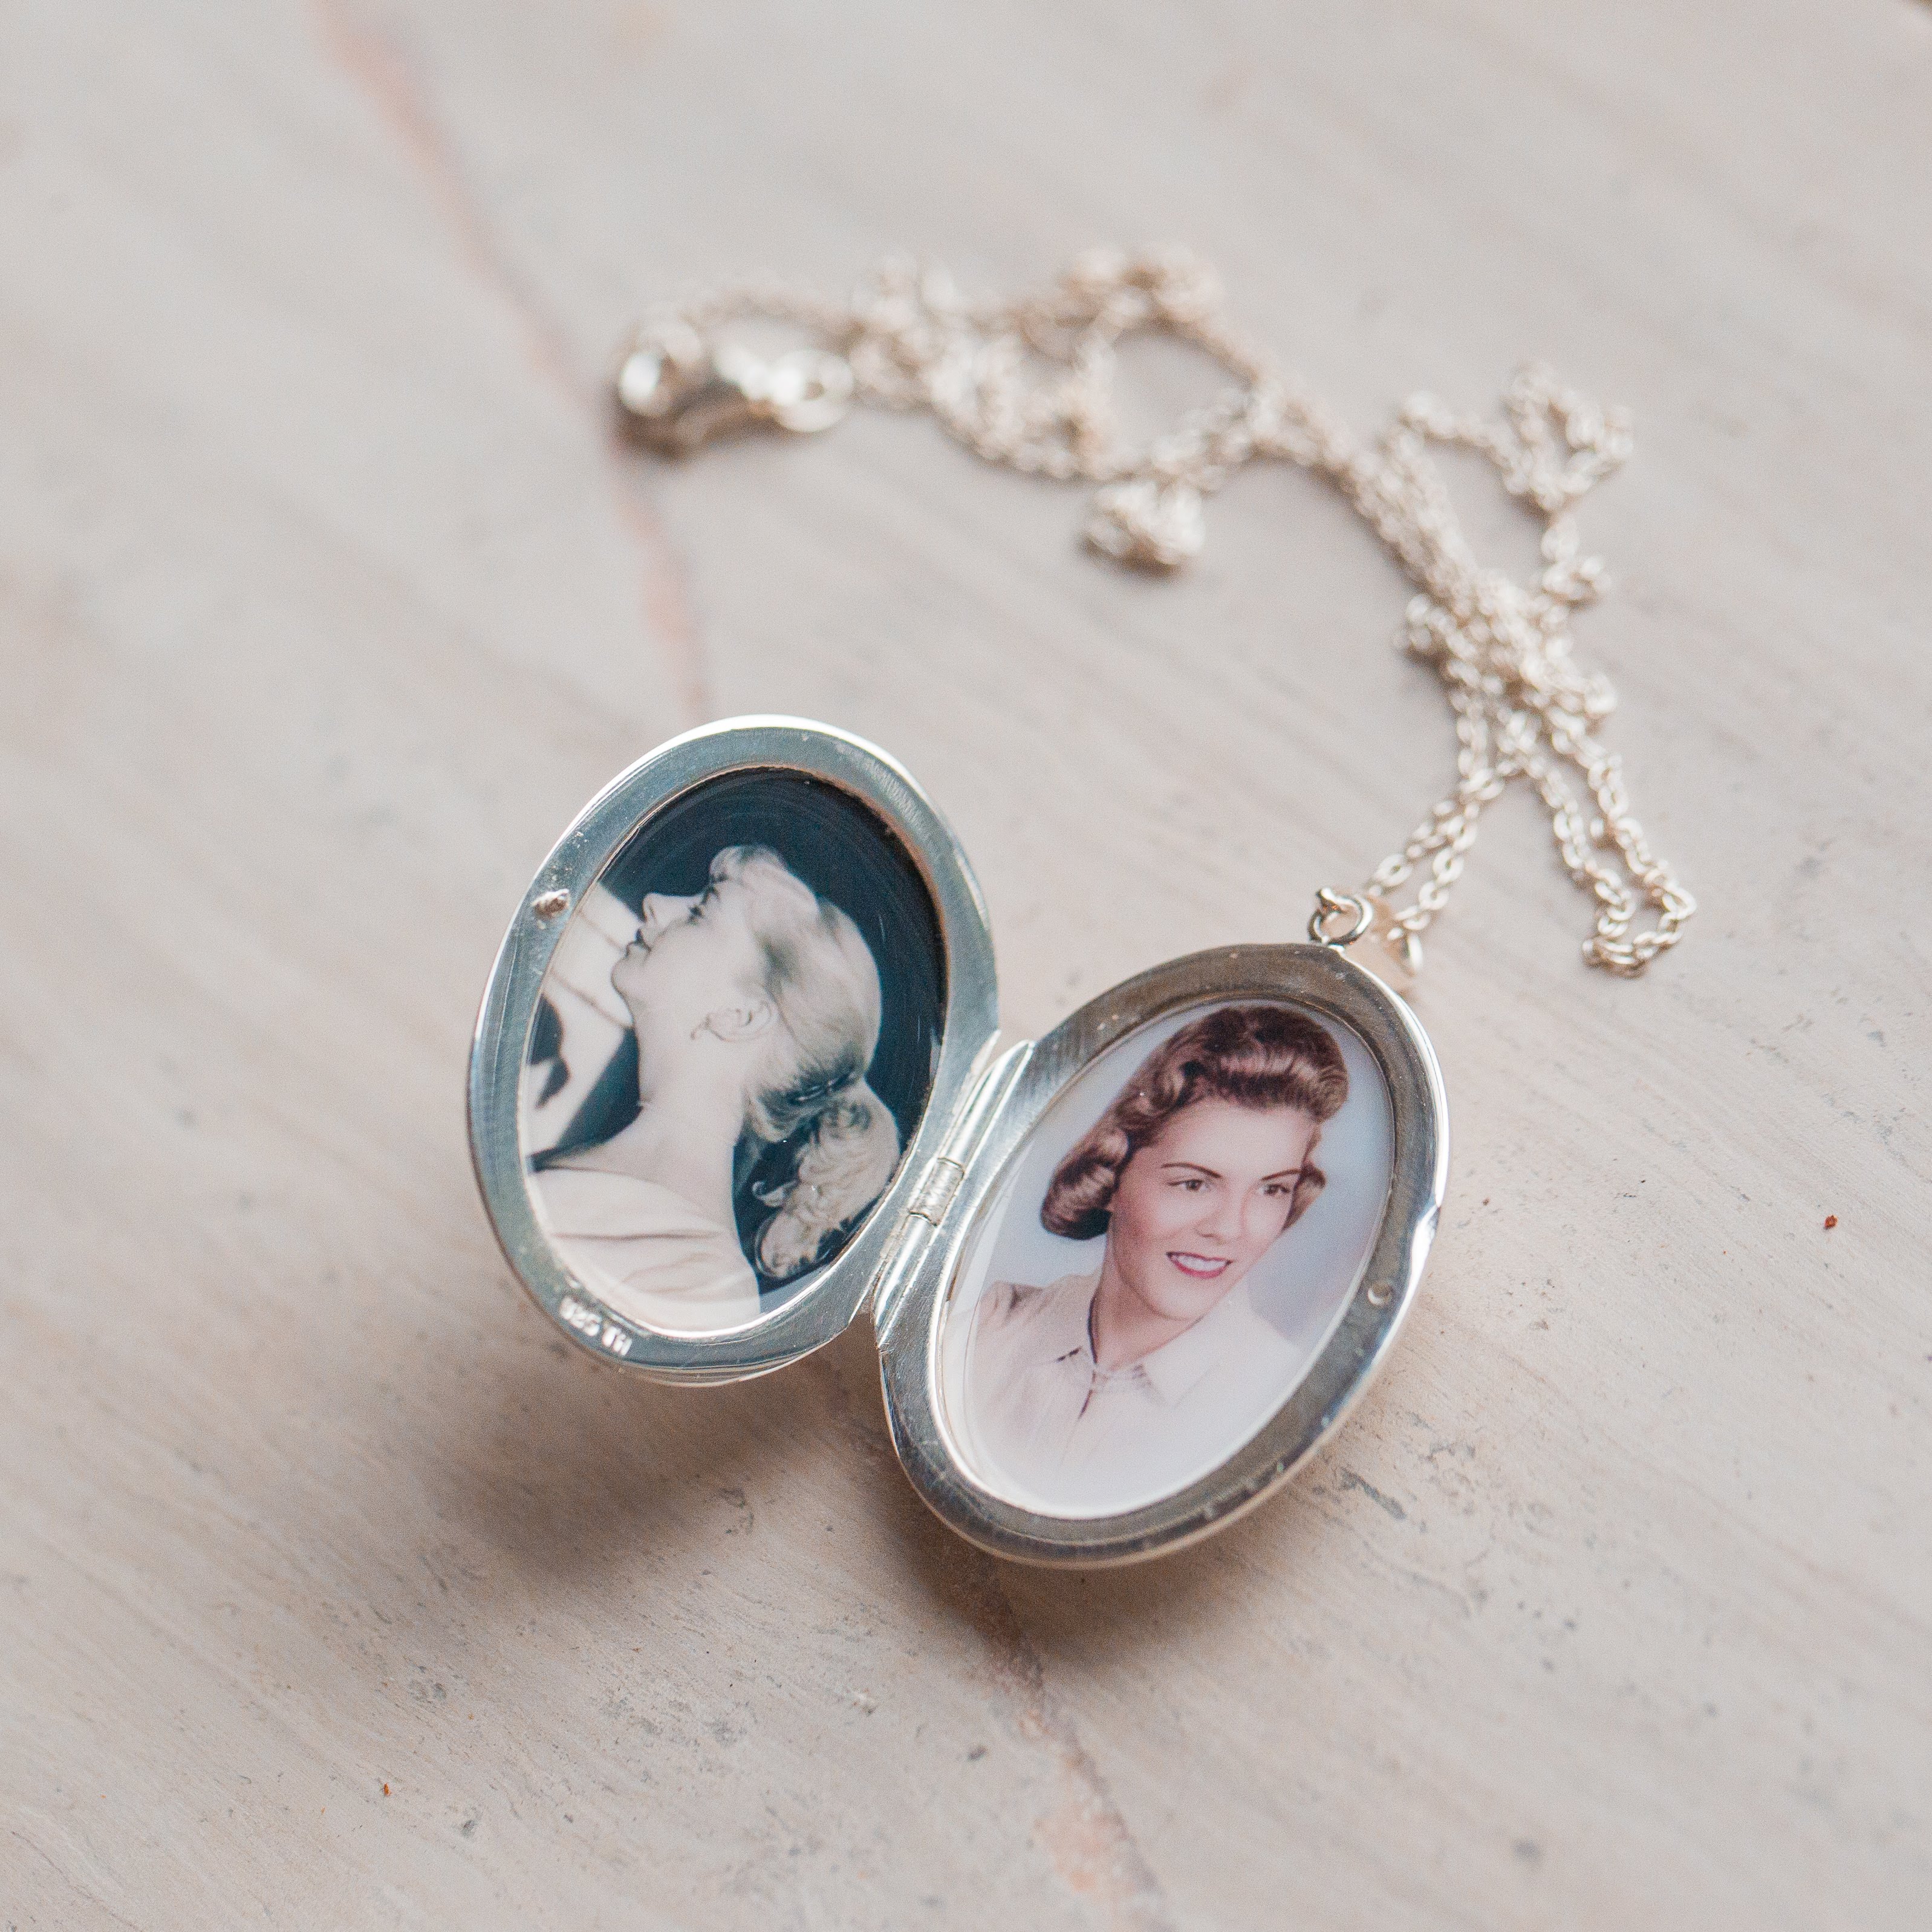 Evelyn Silver Engraved Locket with photo inside